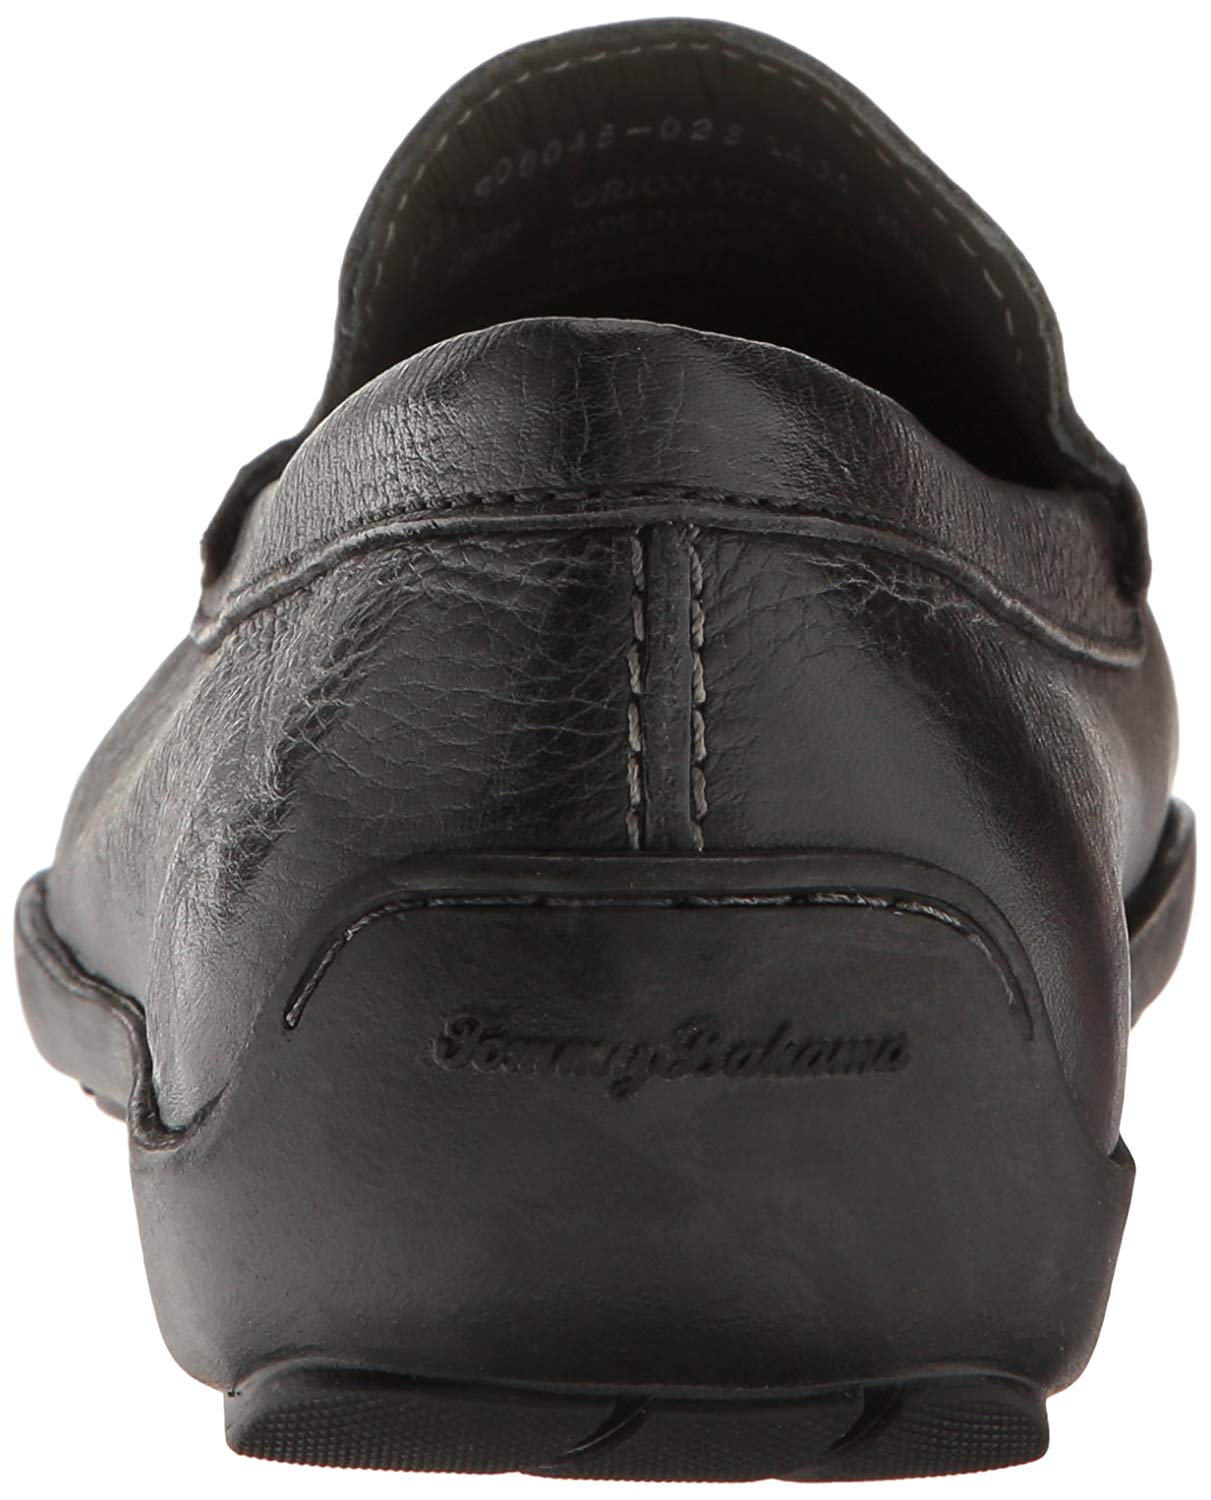 Tommy Bahama Mens Orion Leather Closed Toe Penny Loafer, Black, Size 10 ...